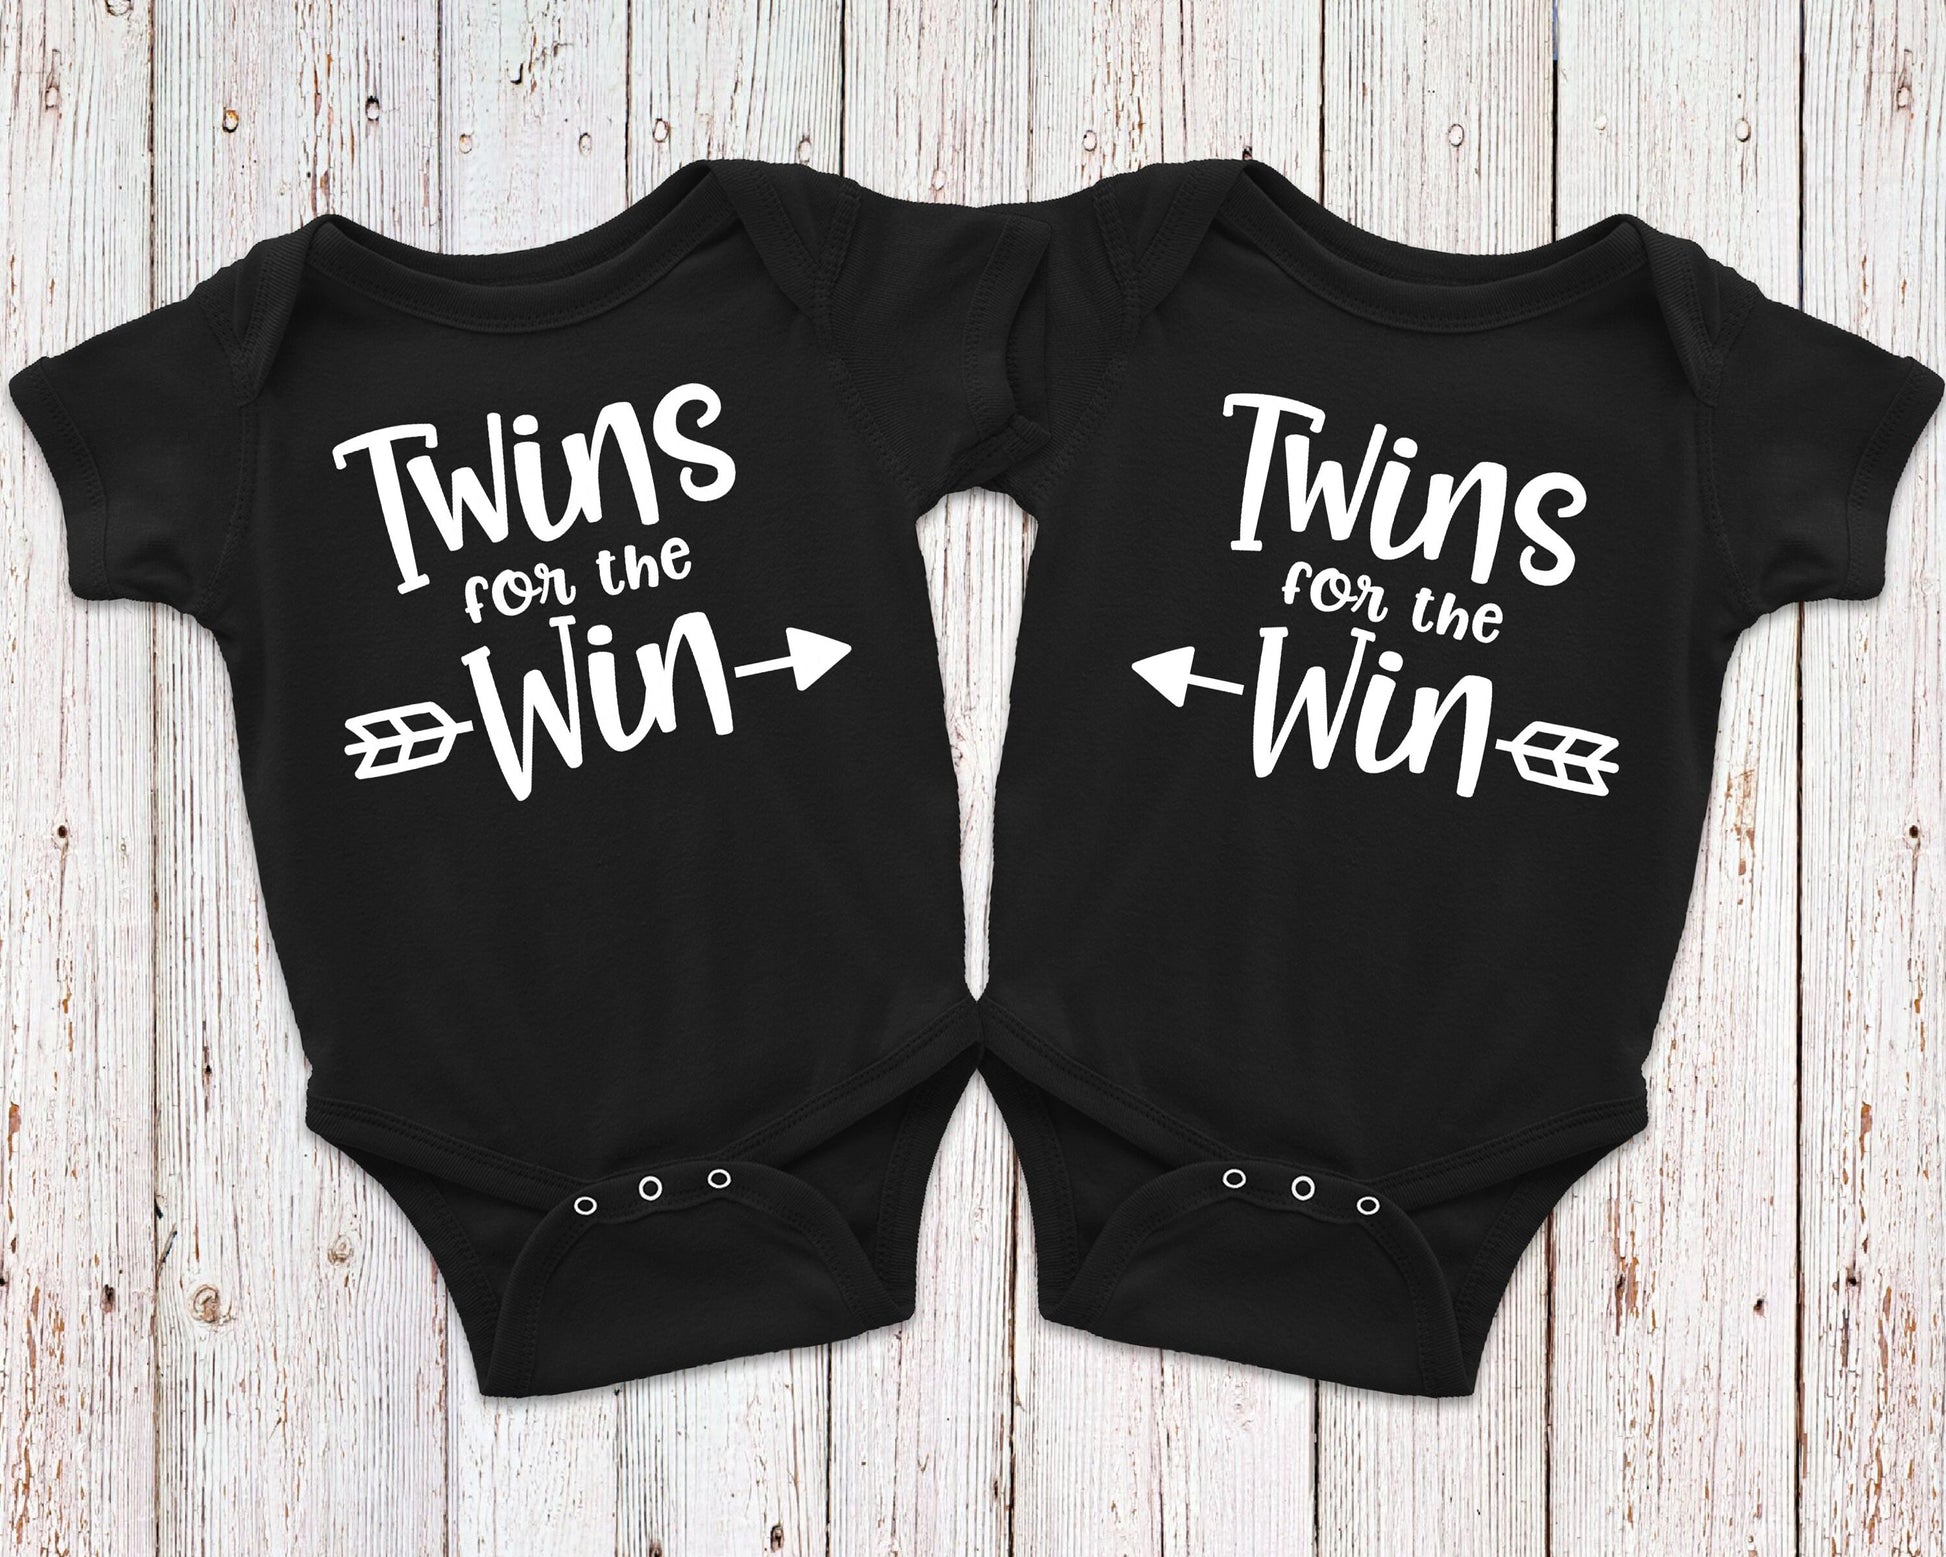 Twins for The Win T-Shirts or Bodysuits for Twins - Identical Twins - Twin Tees - Fraternal Twins - Shirts for Twins - Twin Outfits